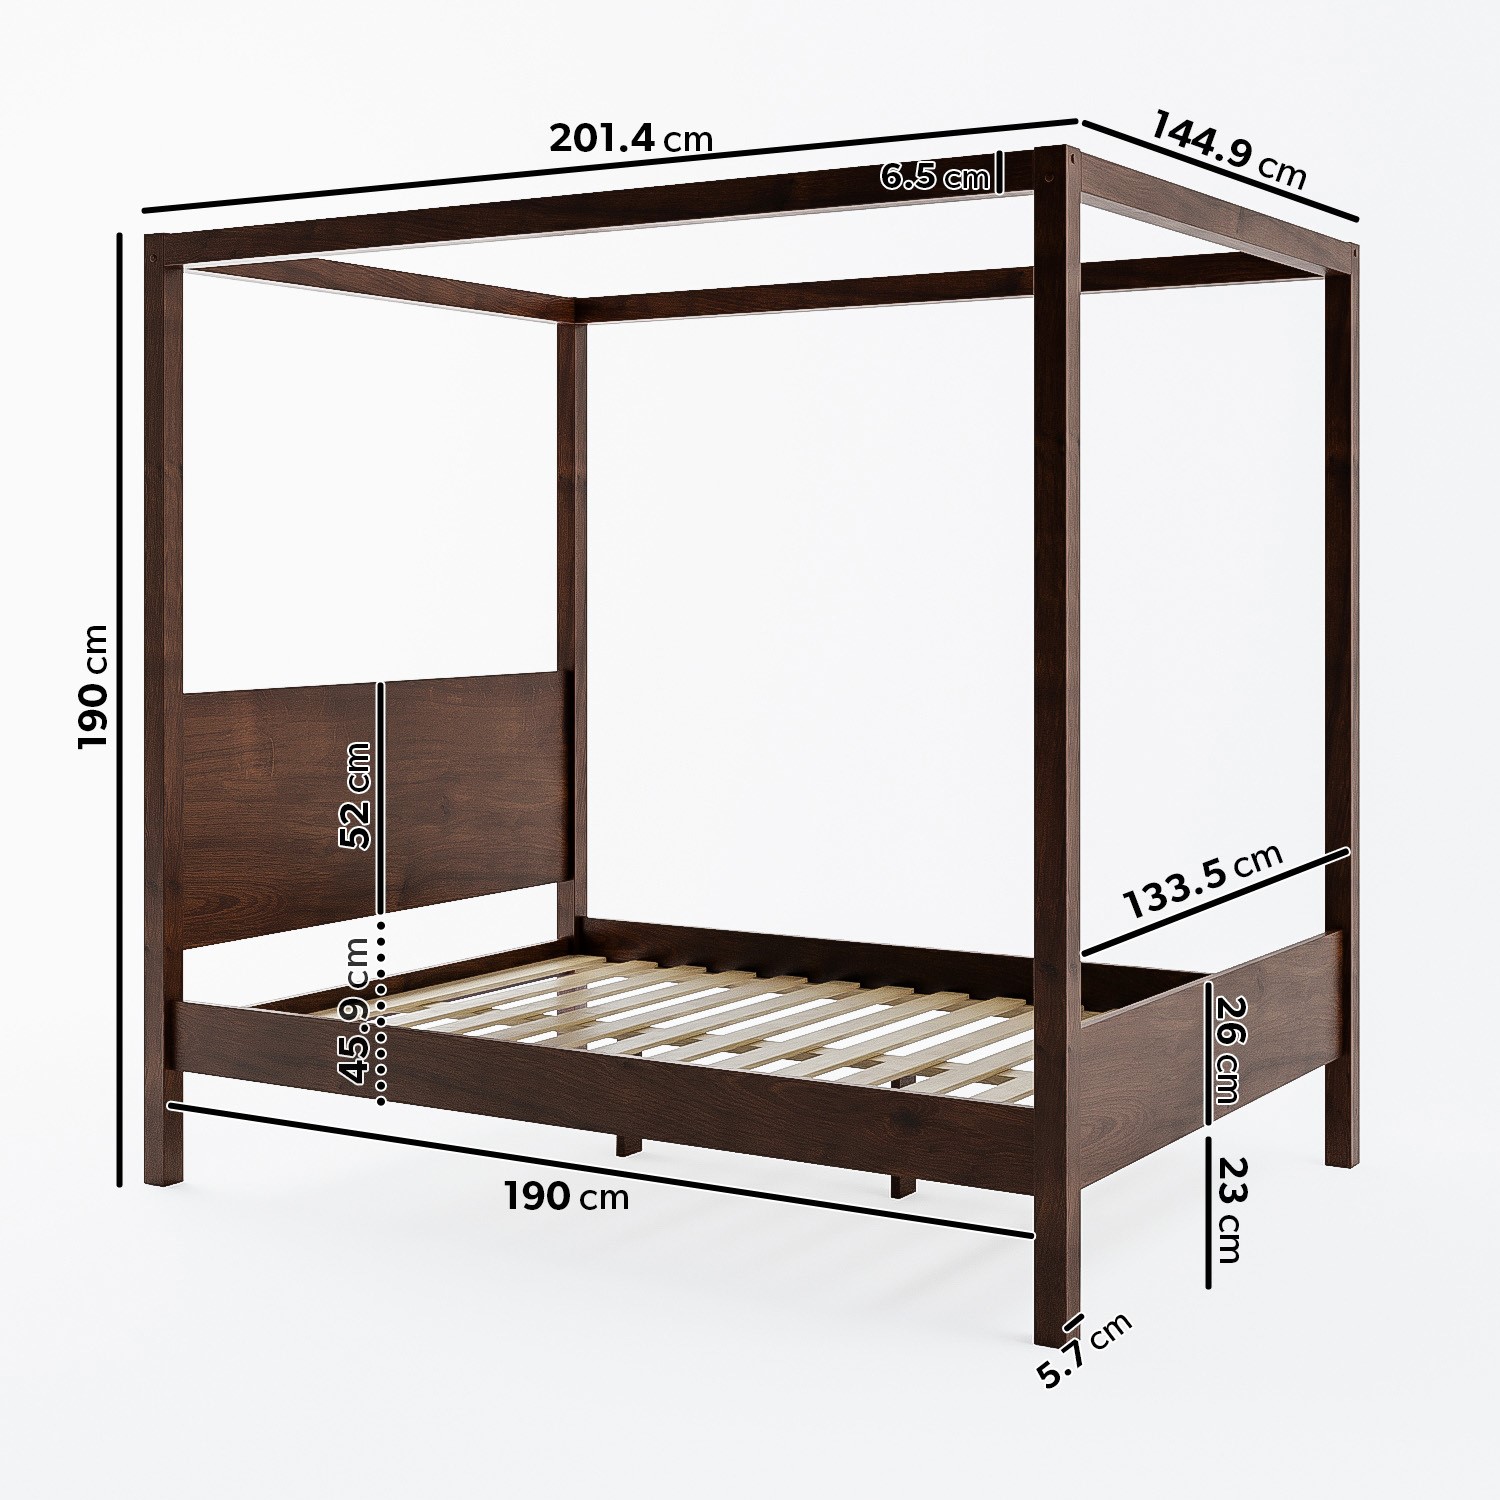 Read more about Double four poster wooden bed frame in walnut victoria